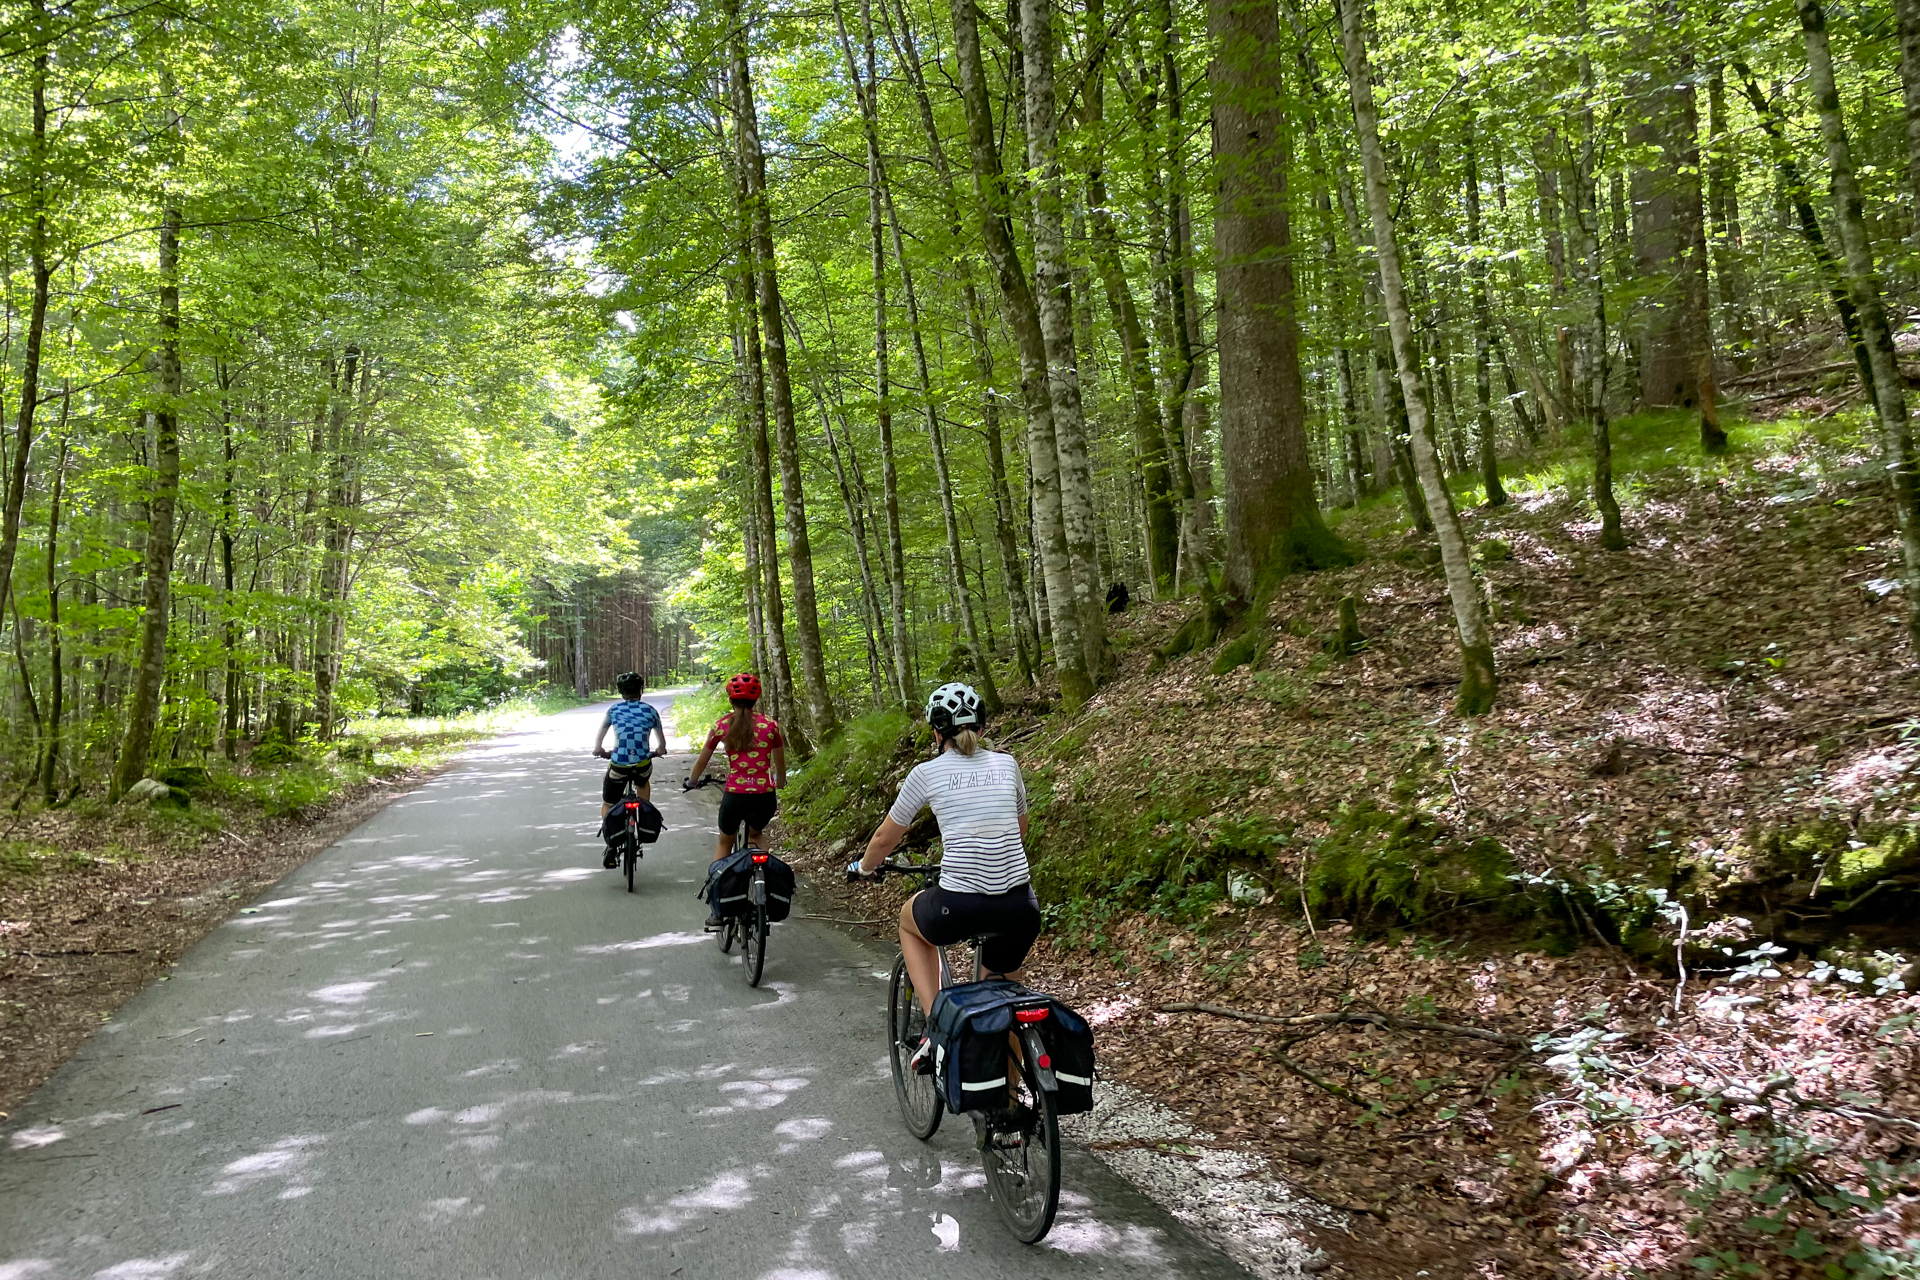 Three riders – a mother and her two teenage children – ride on a narrow road through a thick forest.